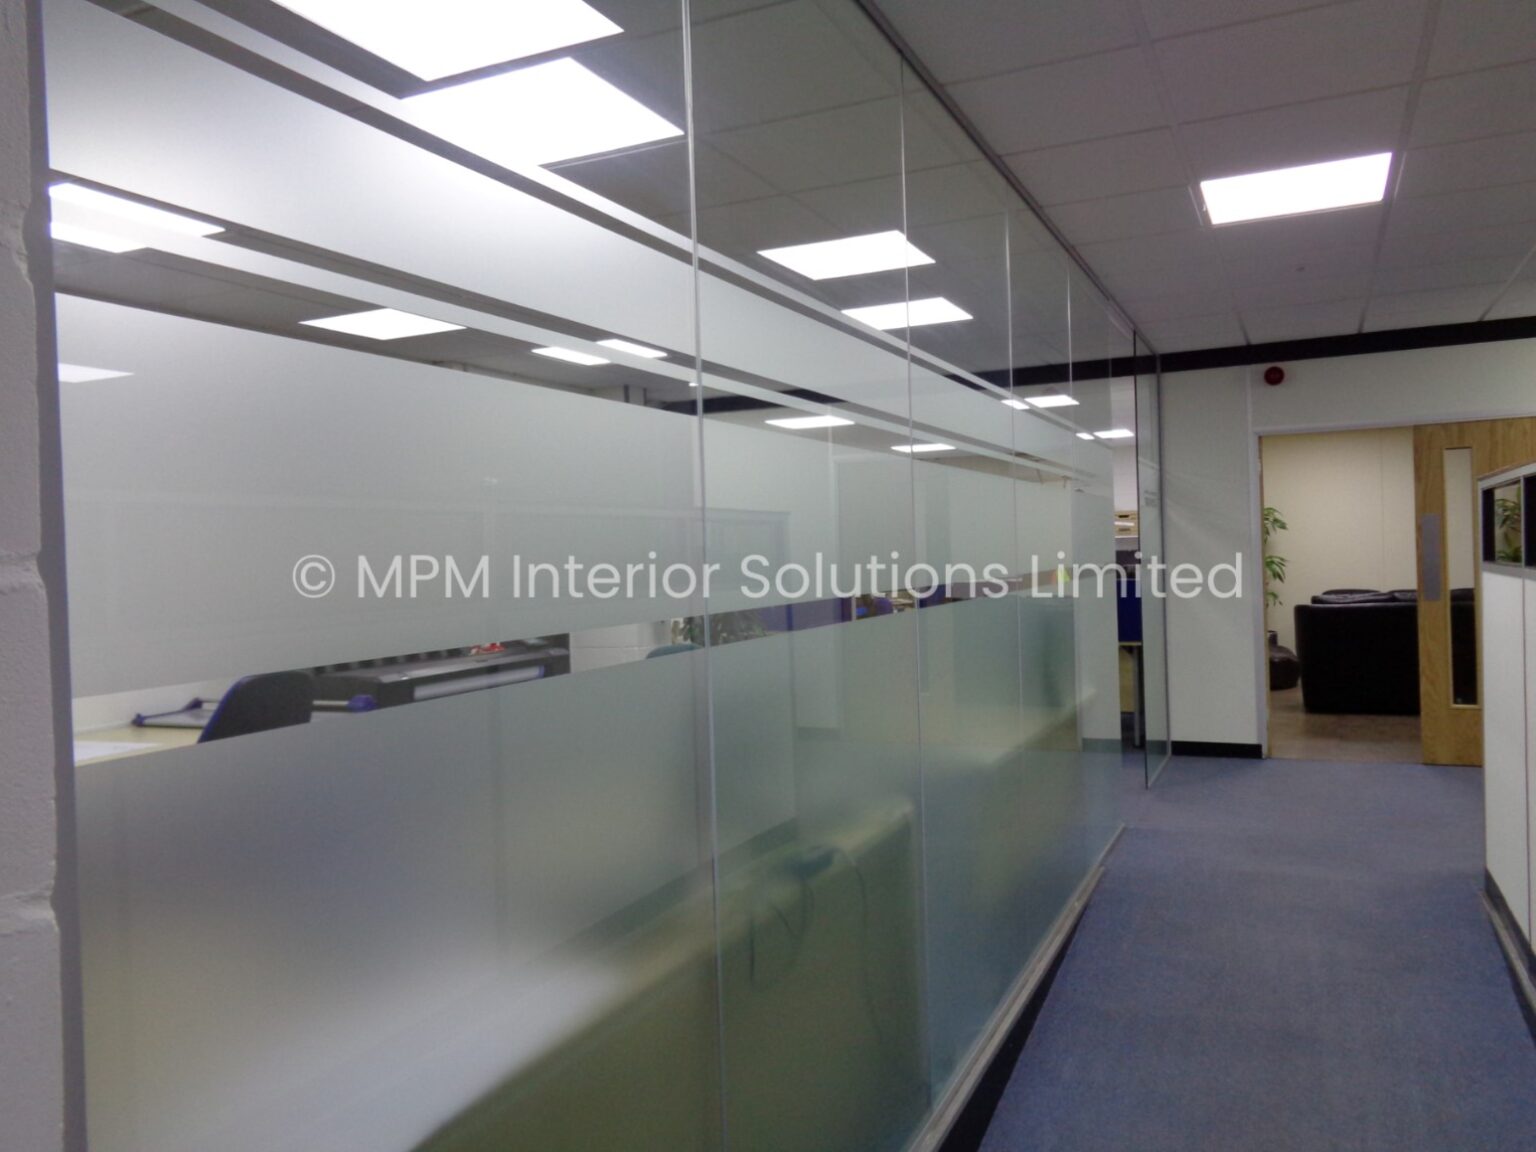 Frameless Glass Office Partitioning, Office Refurbishment/Fit-Out, 50mm Demountable Office Partitioning, Keysource Ltd (Horsham, West Sussex), MPM Interior Solutions Limited